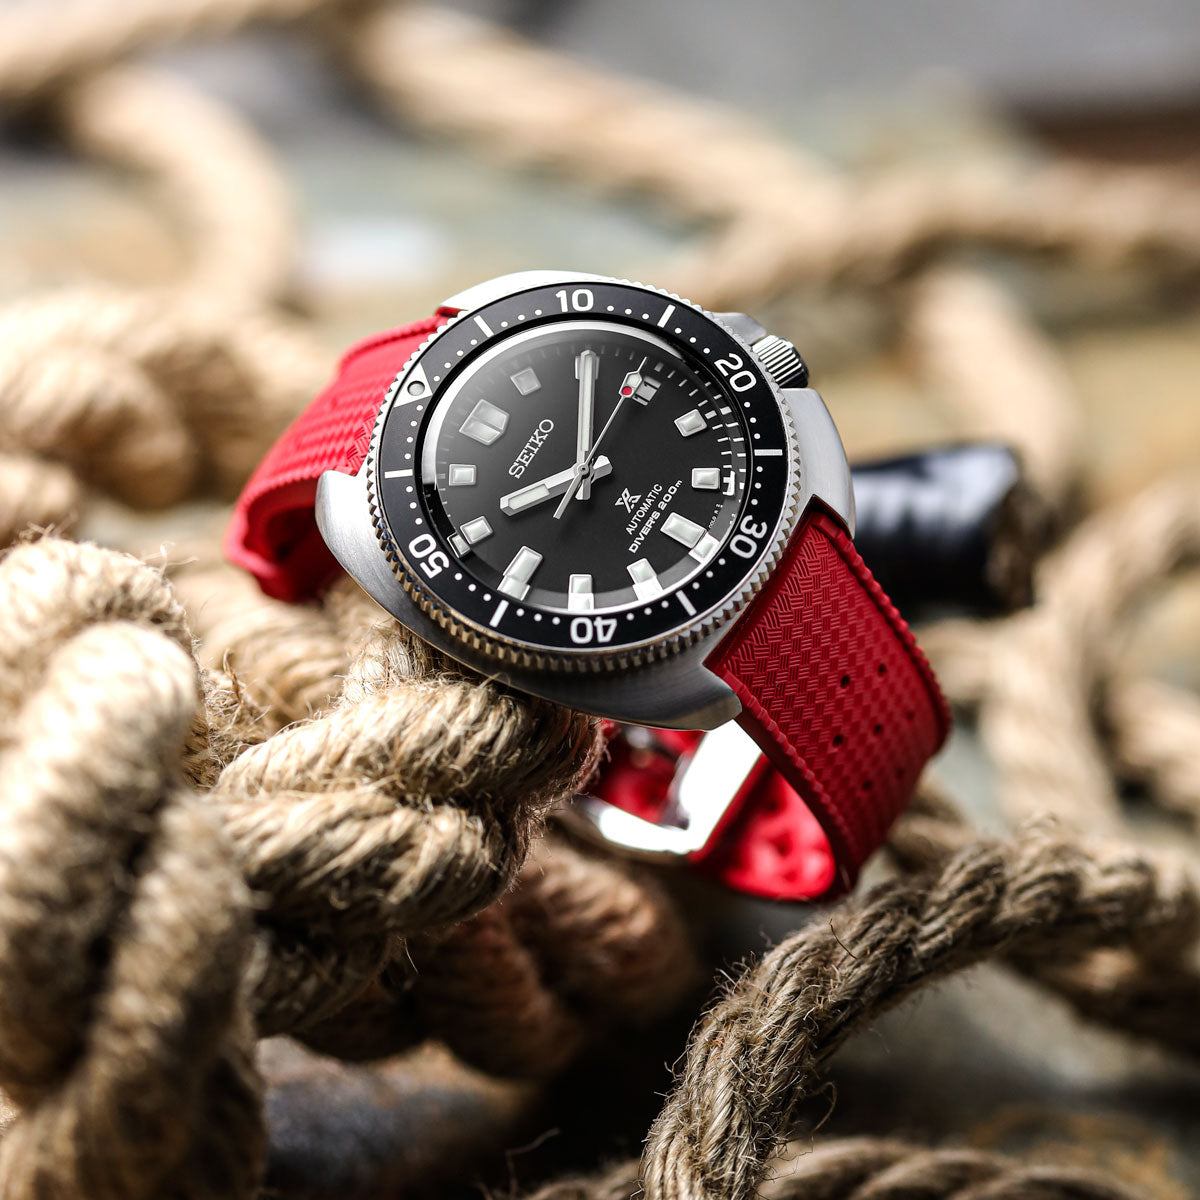 Seiko Diver's Watch's first fabric strap model is now available! – GO OUT